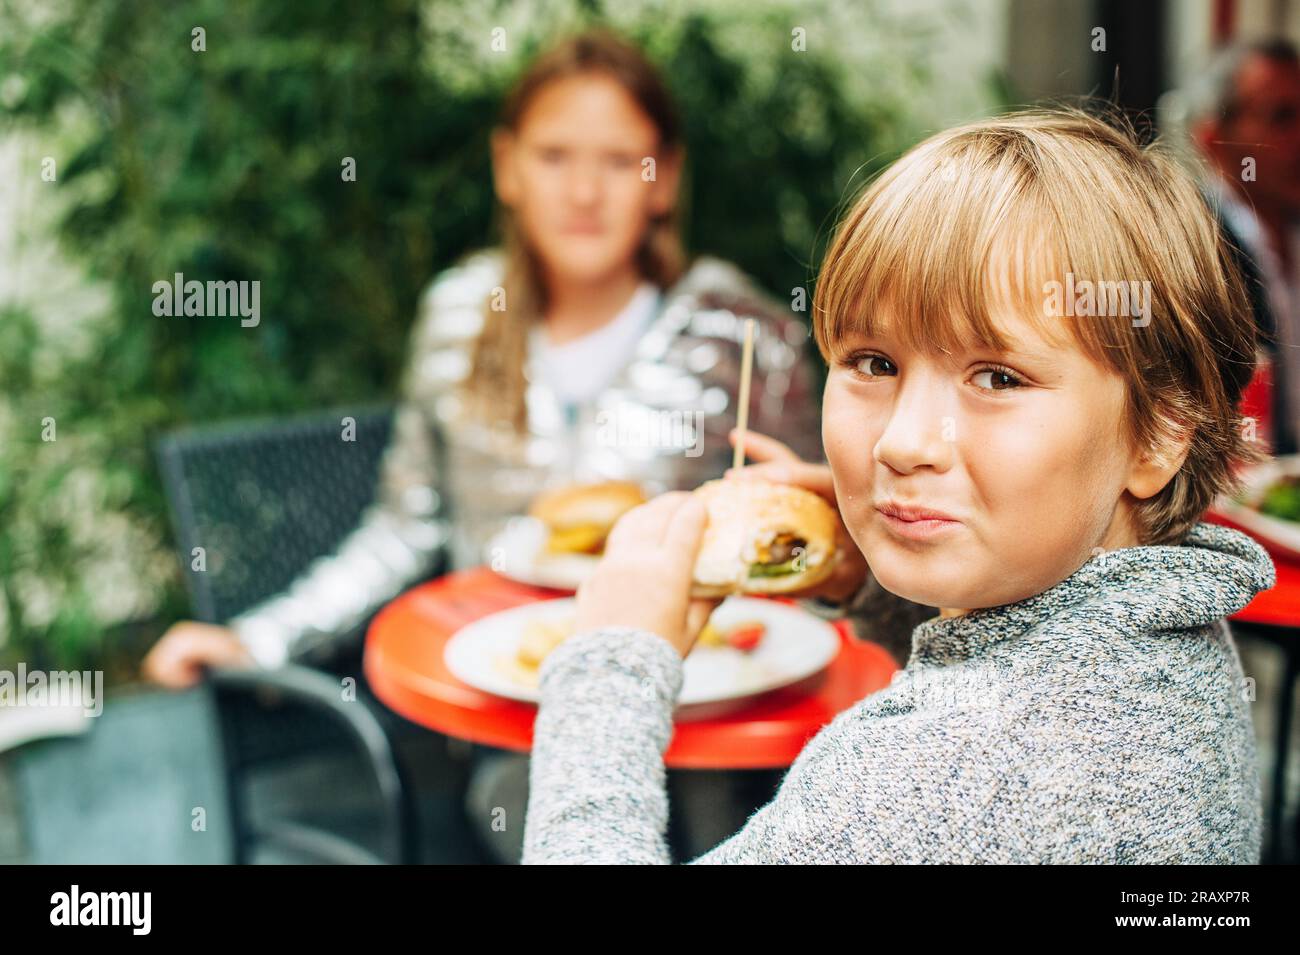 Family having lunch outside on a terrace, background with meal, children eating humburgers Stock Photo